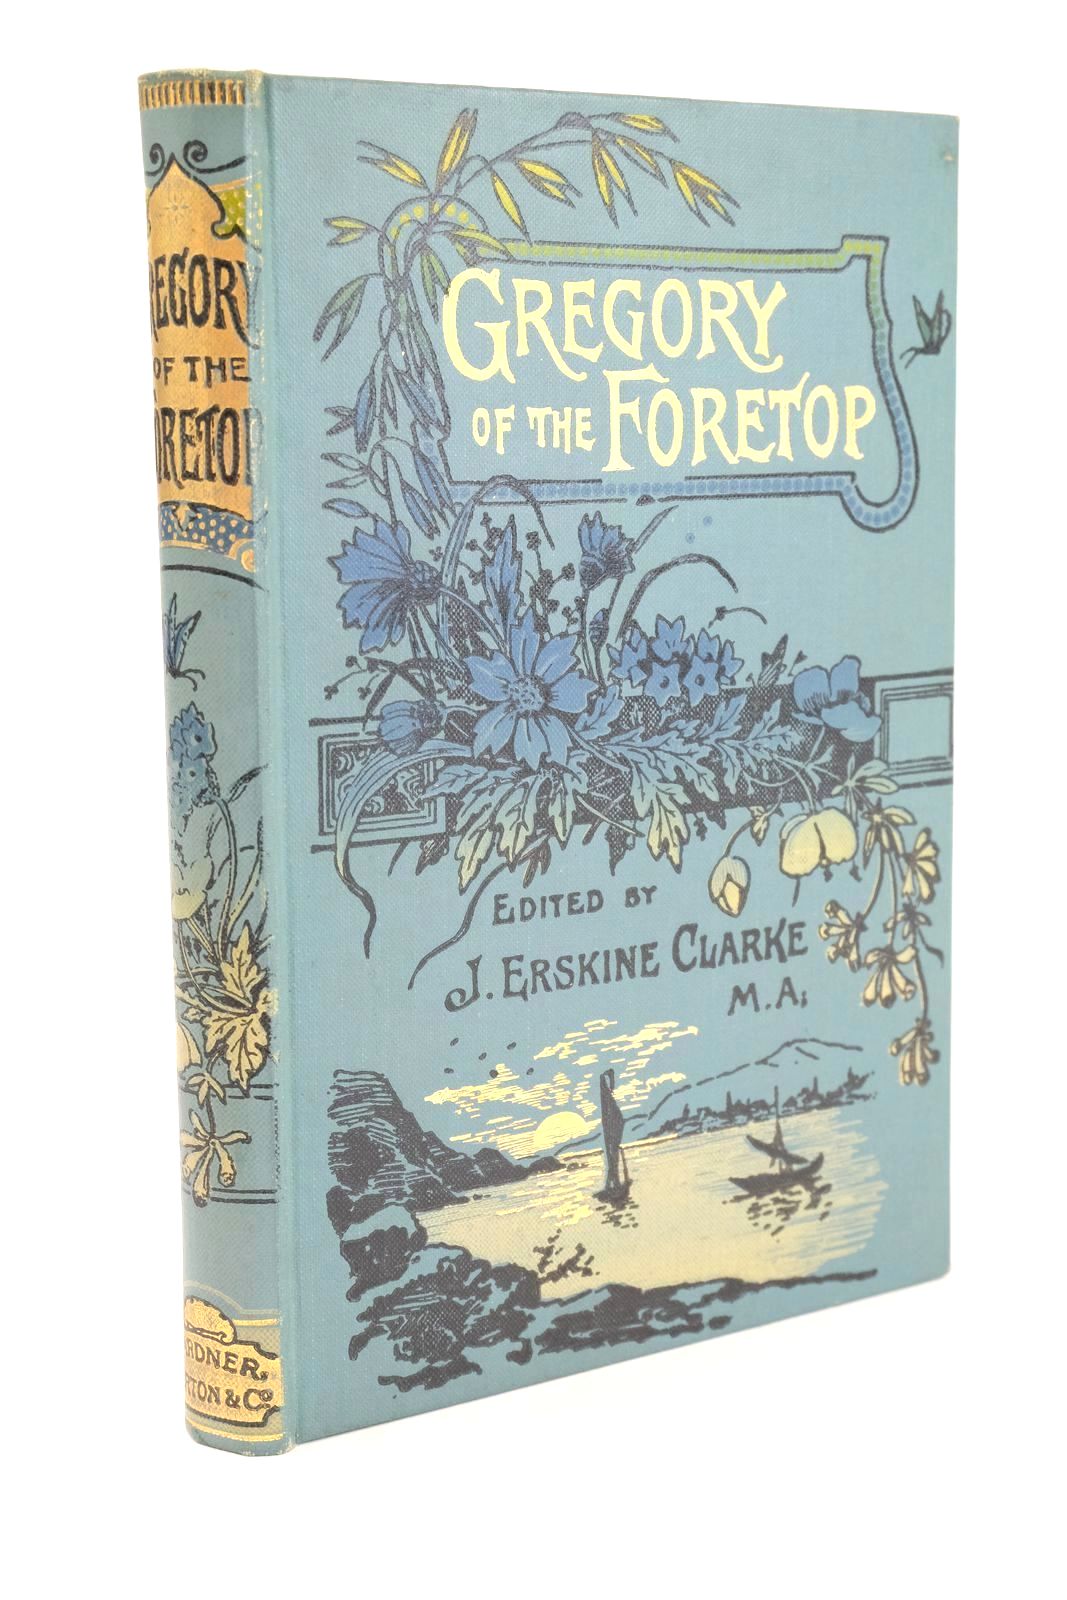 Photo of GREGORY OF THE FORETOP AND OTHER TALES written by Clarke, J. Erskine published by Wells Gardner, Darton & Co. (STOCK CODE: 1325344)  for sale by Stella & Rose's Books